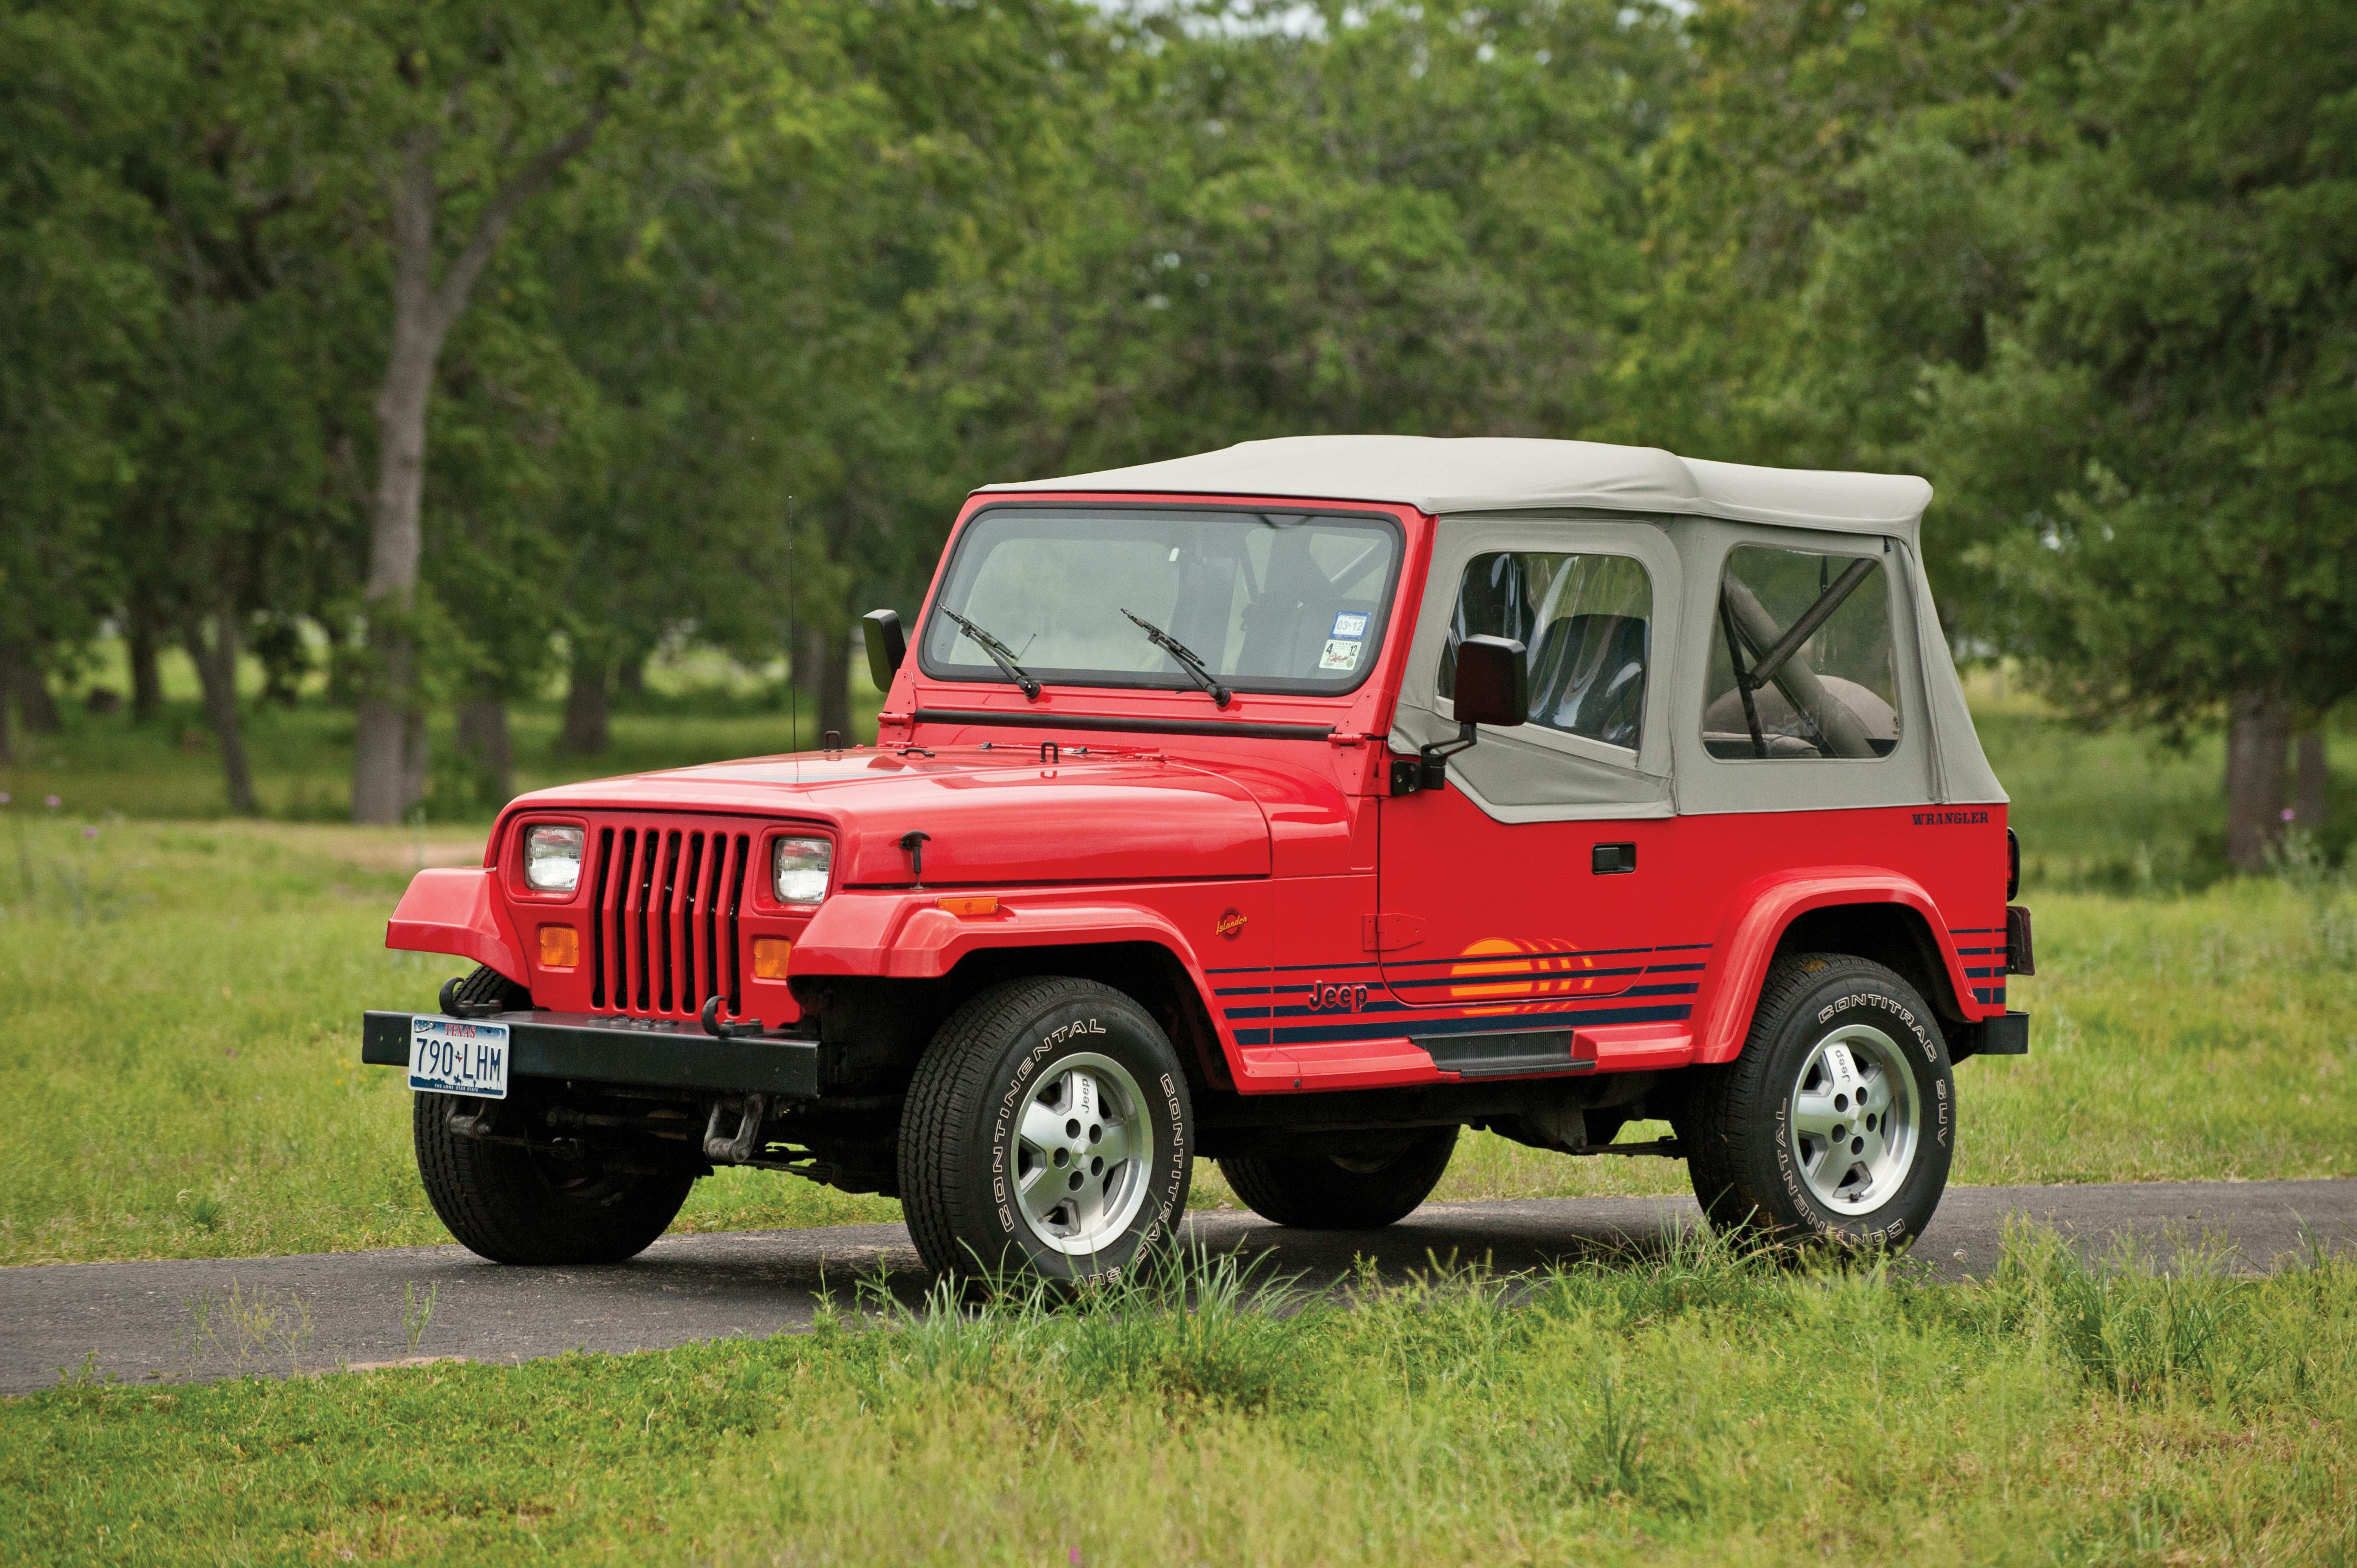 1994 Jeep Wrangler SE | Hagerty Valuation Tools